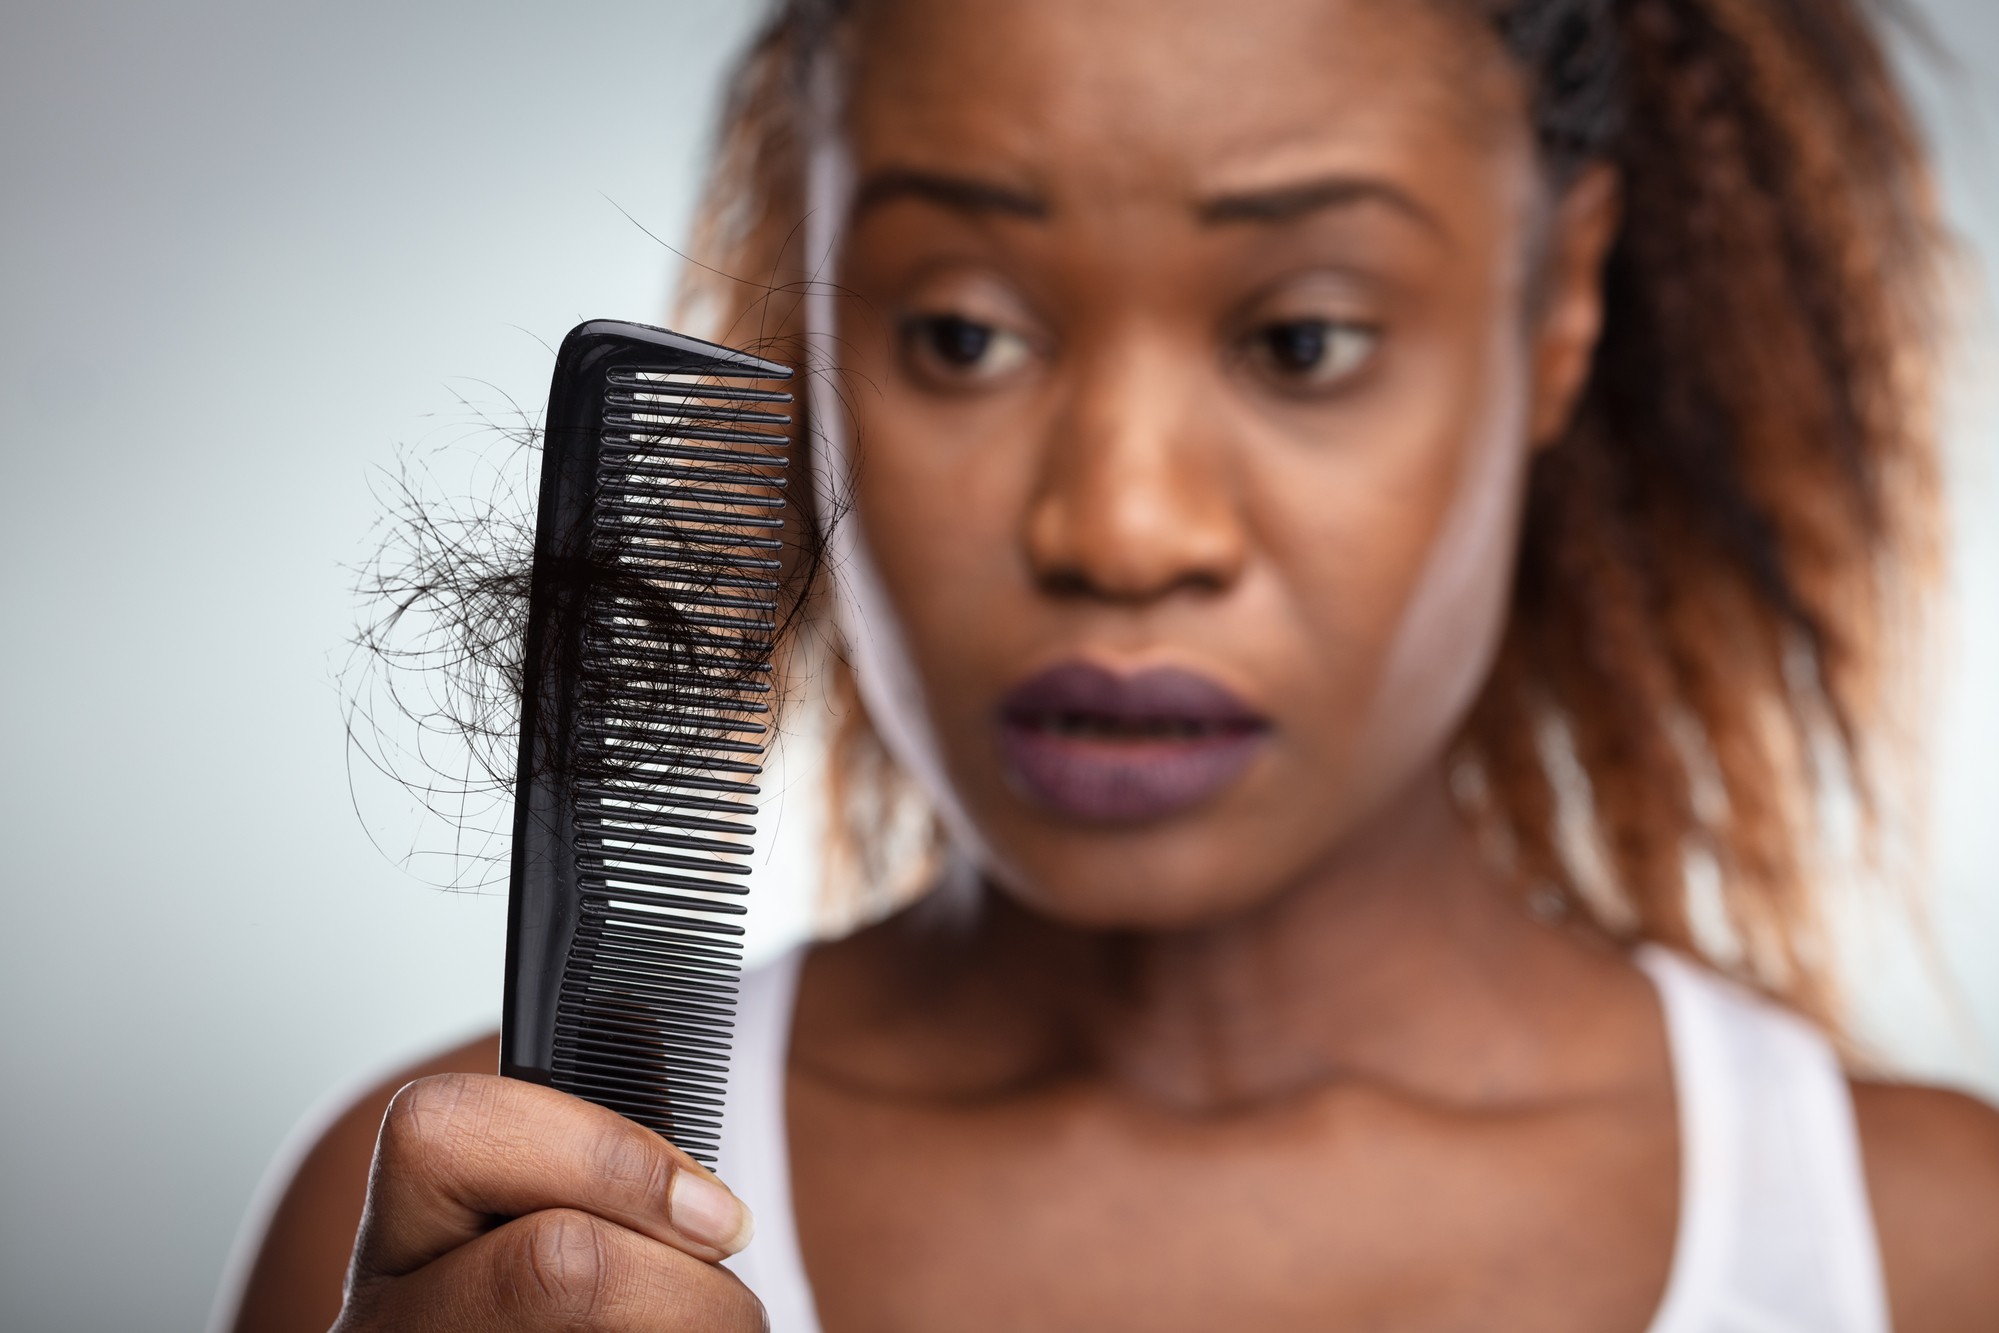 Woman looking at hair loss in comb regarding Deva Concepts class action lawsuit accusing the companies DevaCurl products of causing hair loss and damage